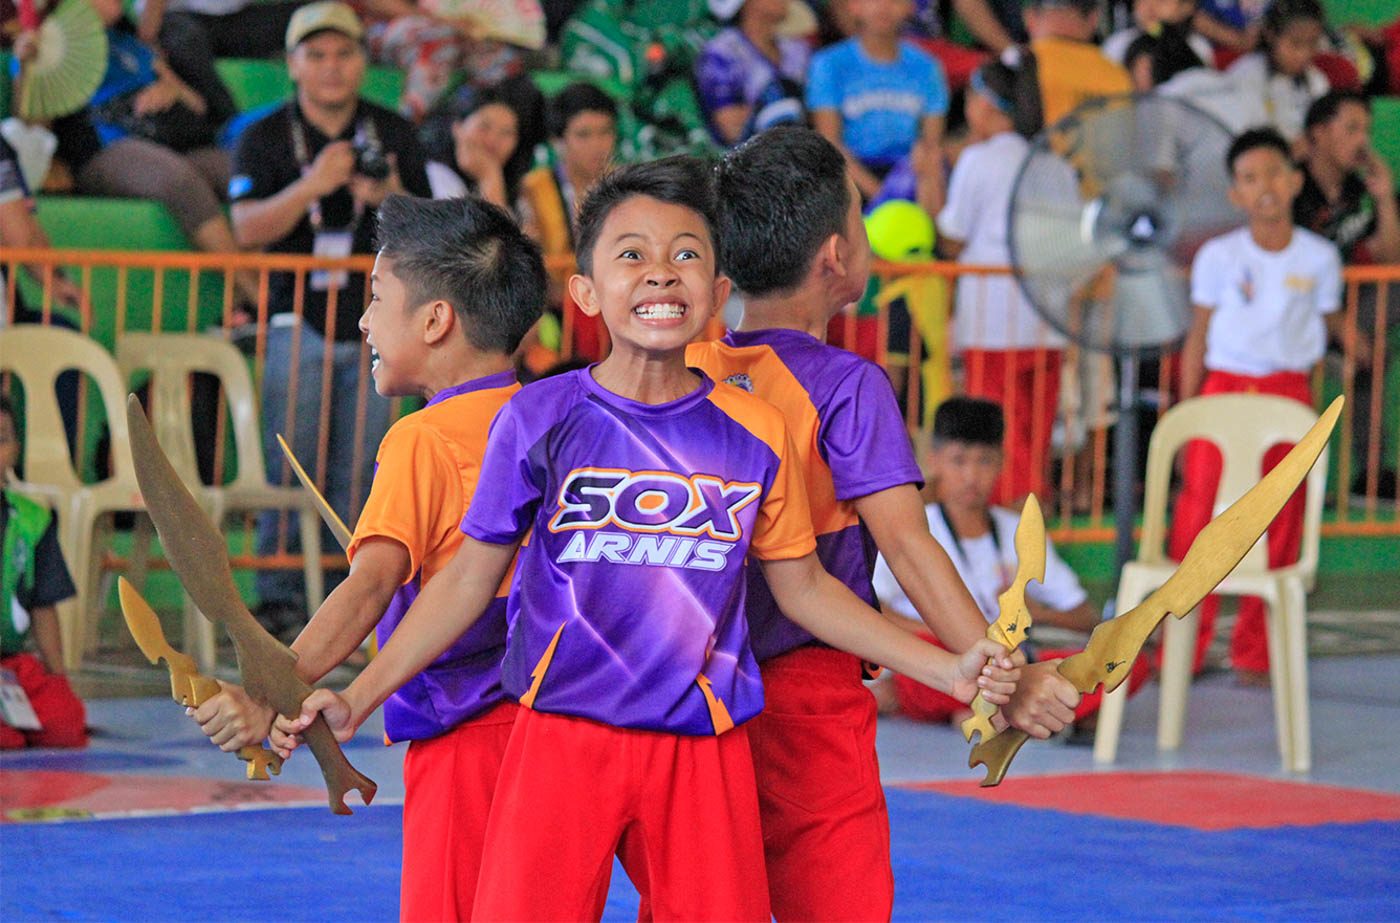 Elementary grade school Andrei Fritz Justine Alcarioto of region XII grab 2 golds medals in boys division of Arnis Sports at the 2018 palarong pambansa 2018. Photo by Mau Victa/Rappler 